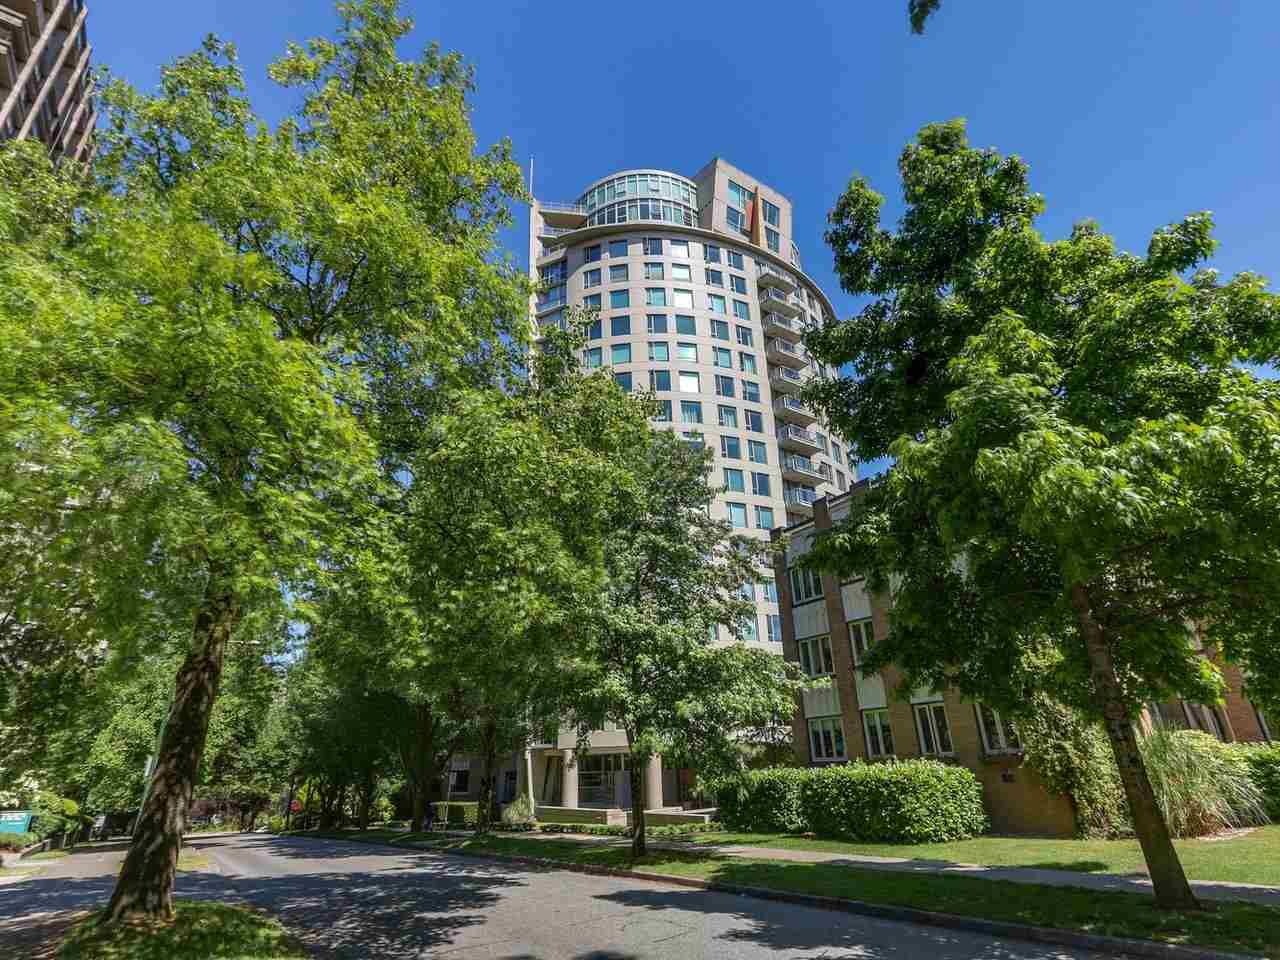 Main Photo: 806 1277 NELSON STREET in : West End VW Condo for sale (Vancouver West)  : MLS®# R2268313